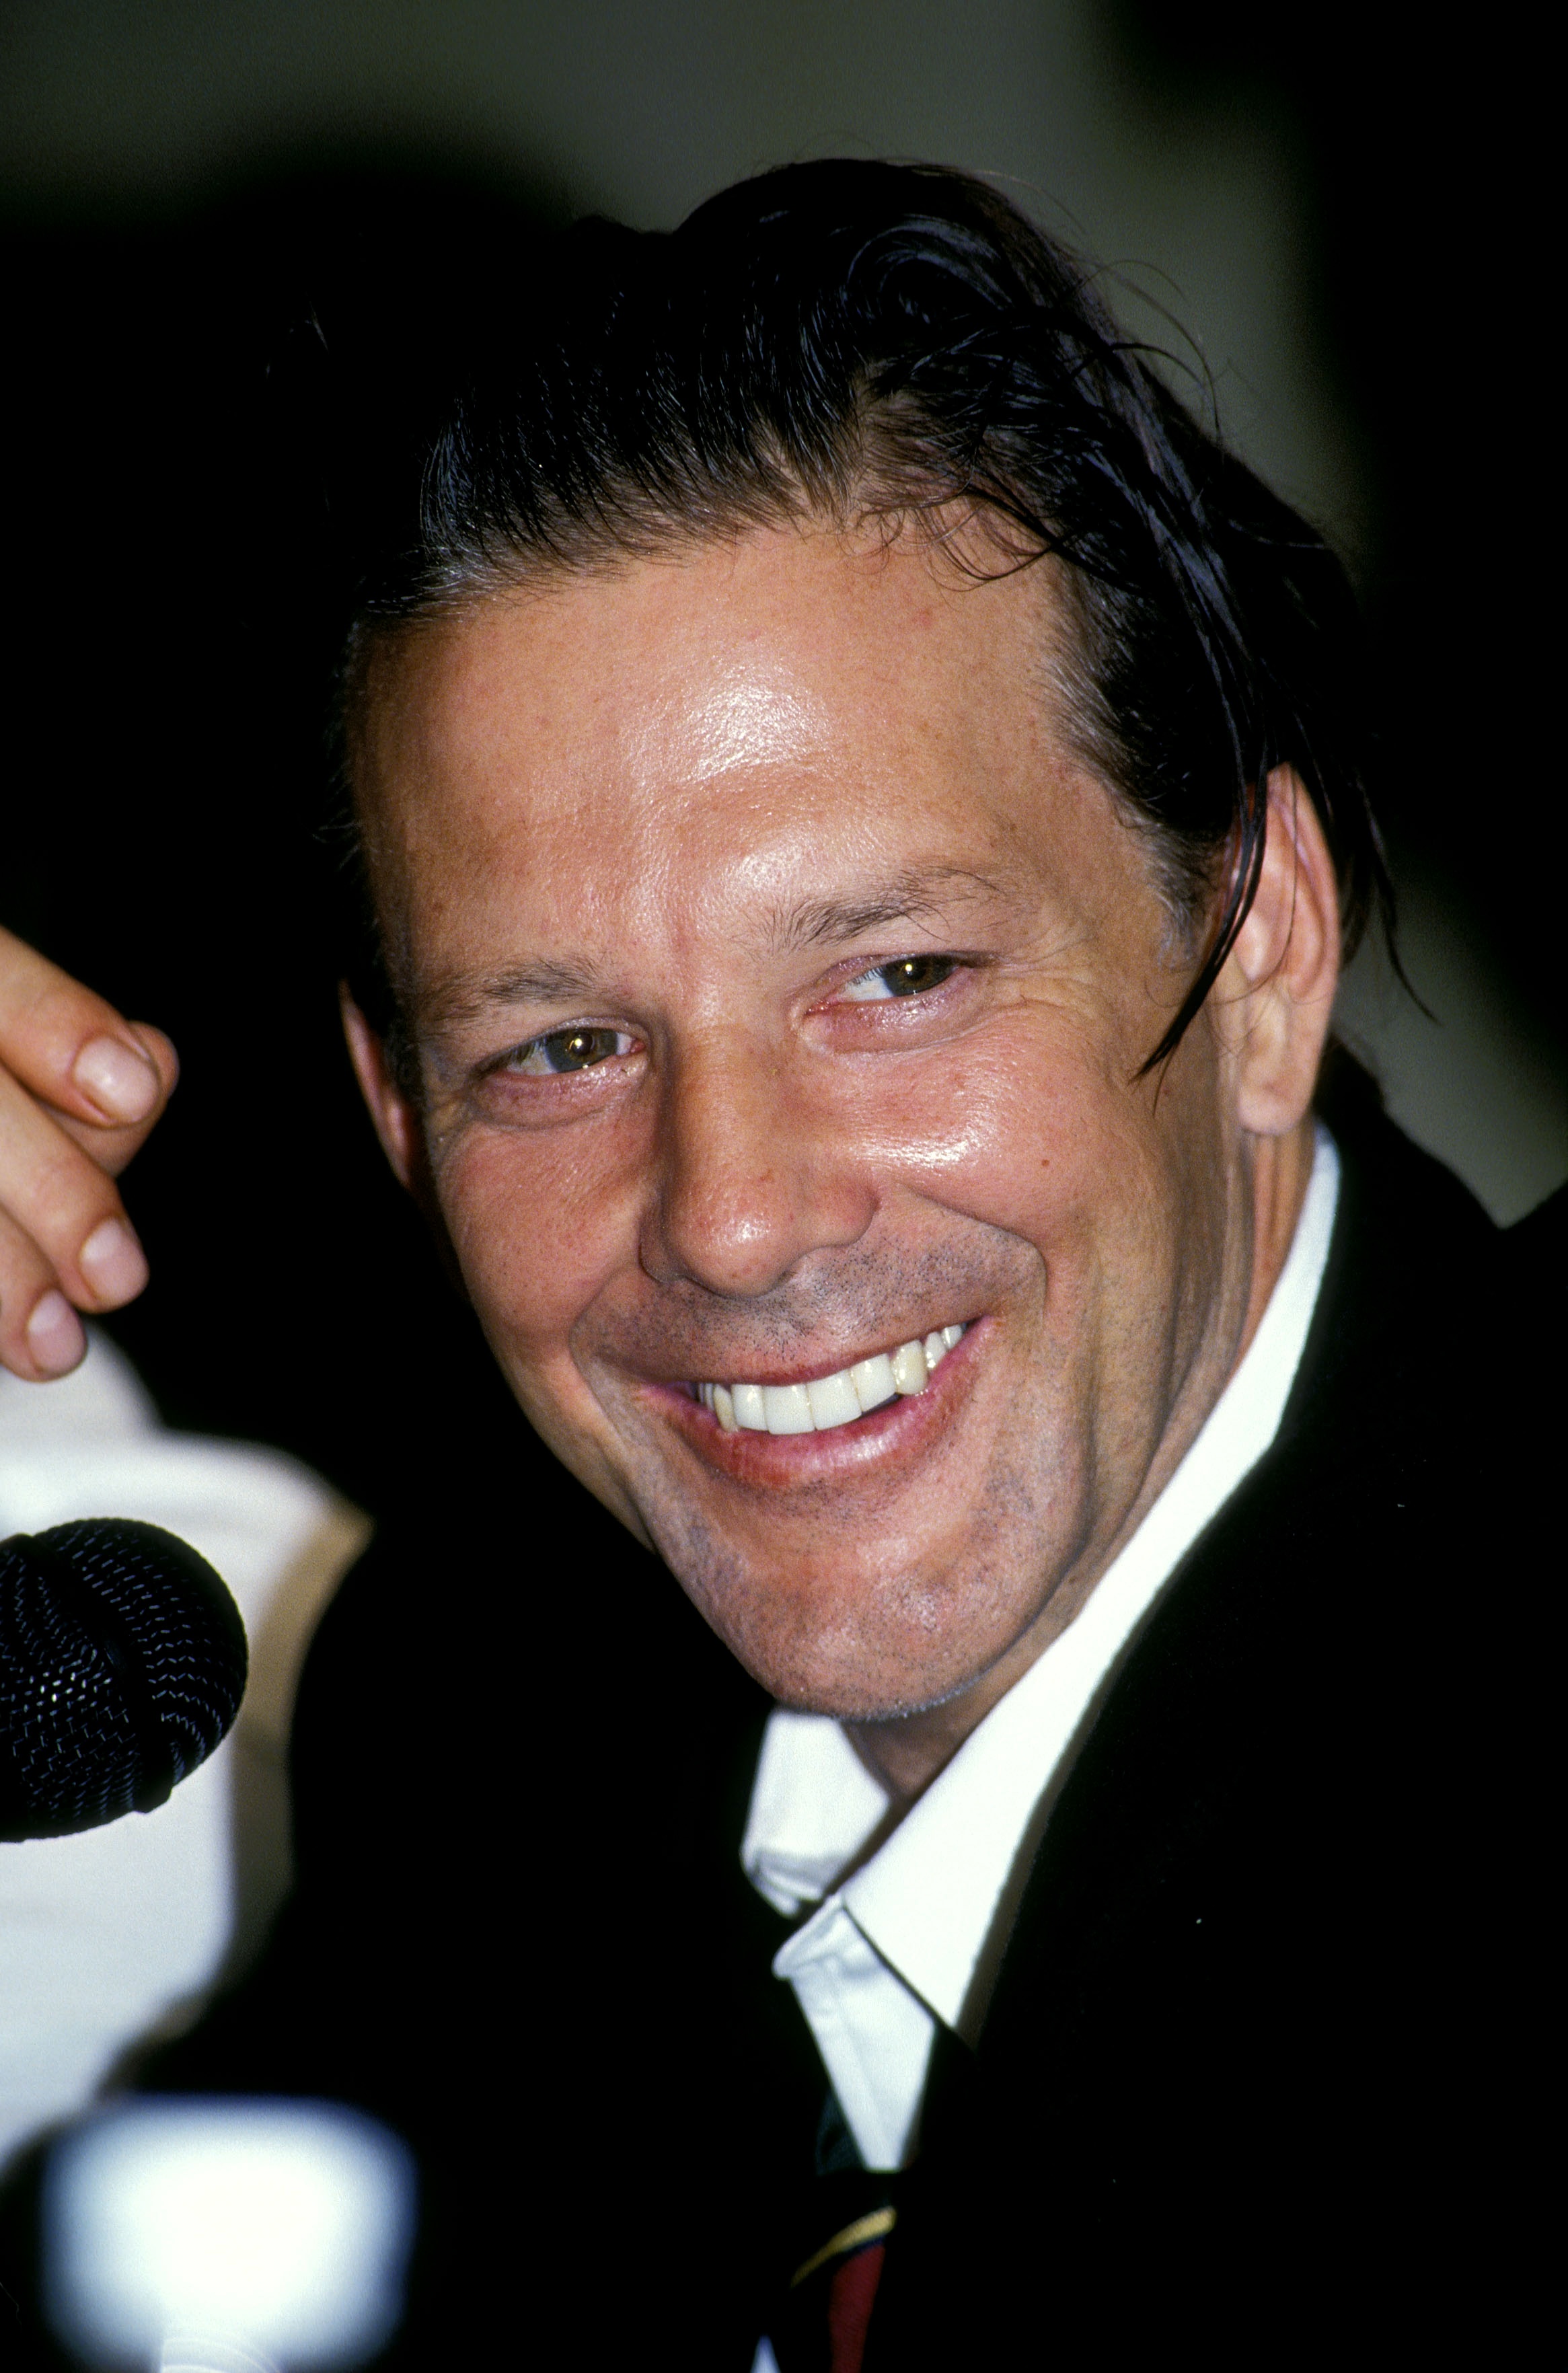 Mickey Rourke at a press conference on August 1, 1993 in Buenos Aires, Argentina. | Source: Getty Images